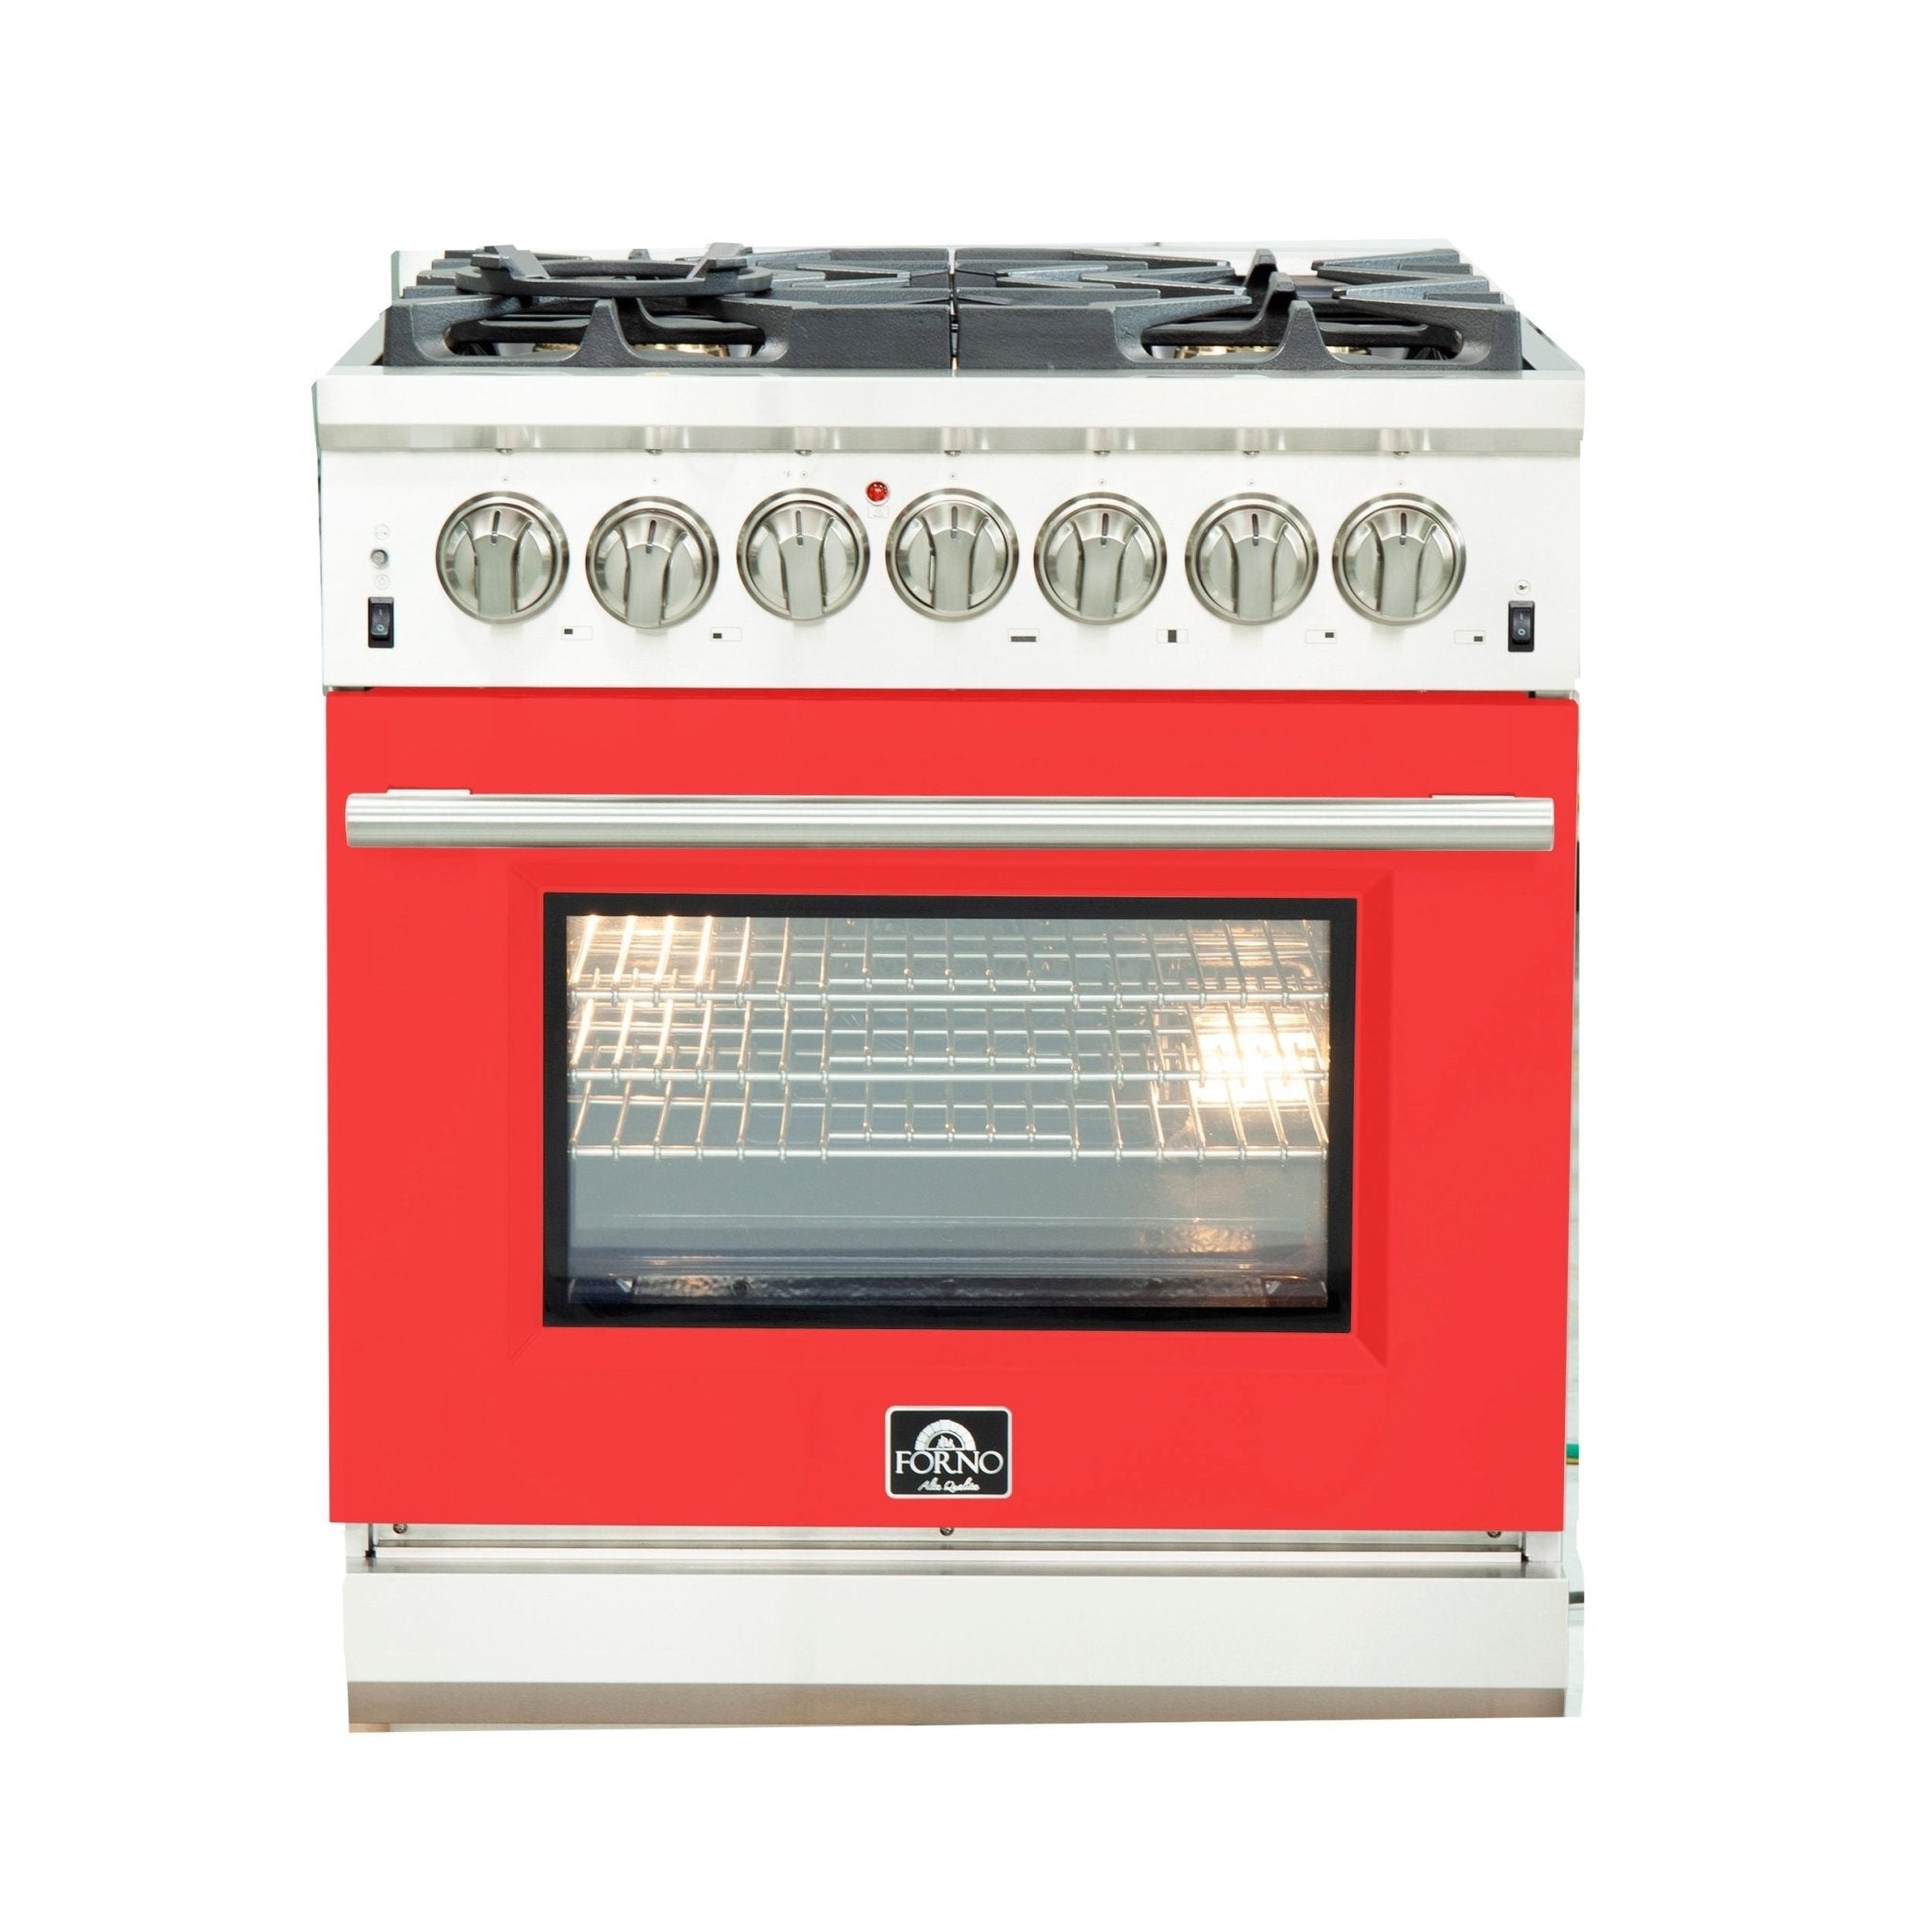 Forno 30″ Pro Series Capriasca Gas Burner / Electric Oven in Stainless Steel 5 Italian Burners, FFSGS6187-30 - Smart Kitchen Lab